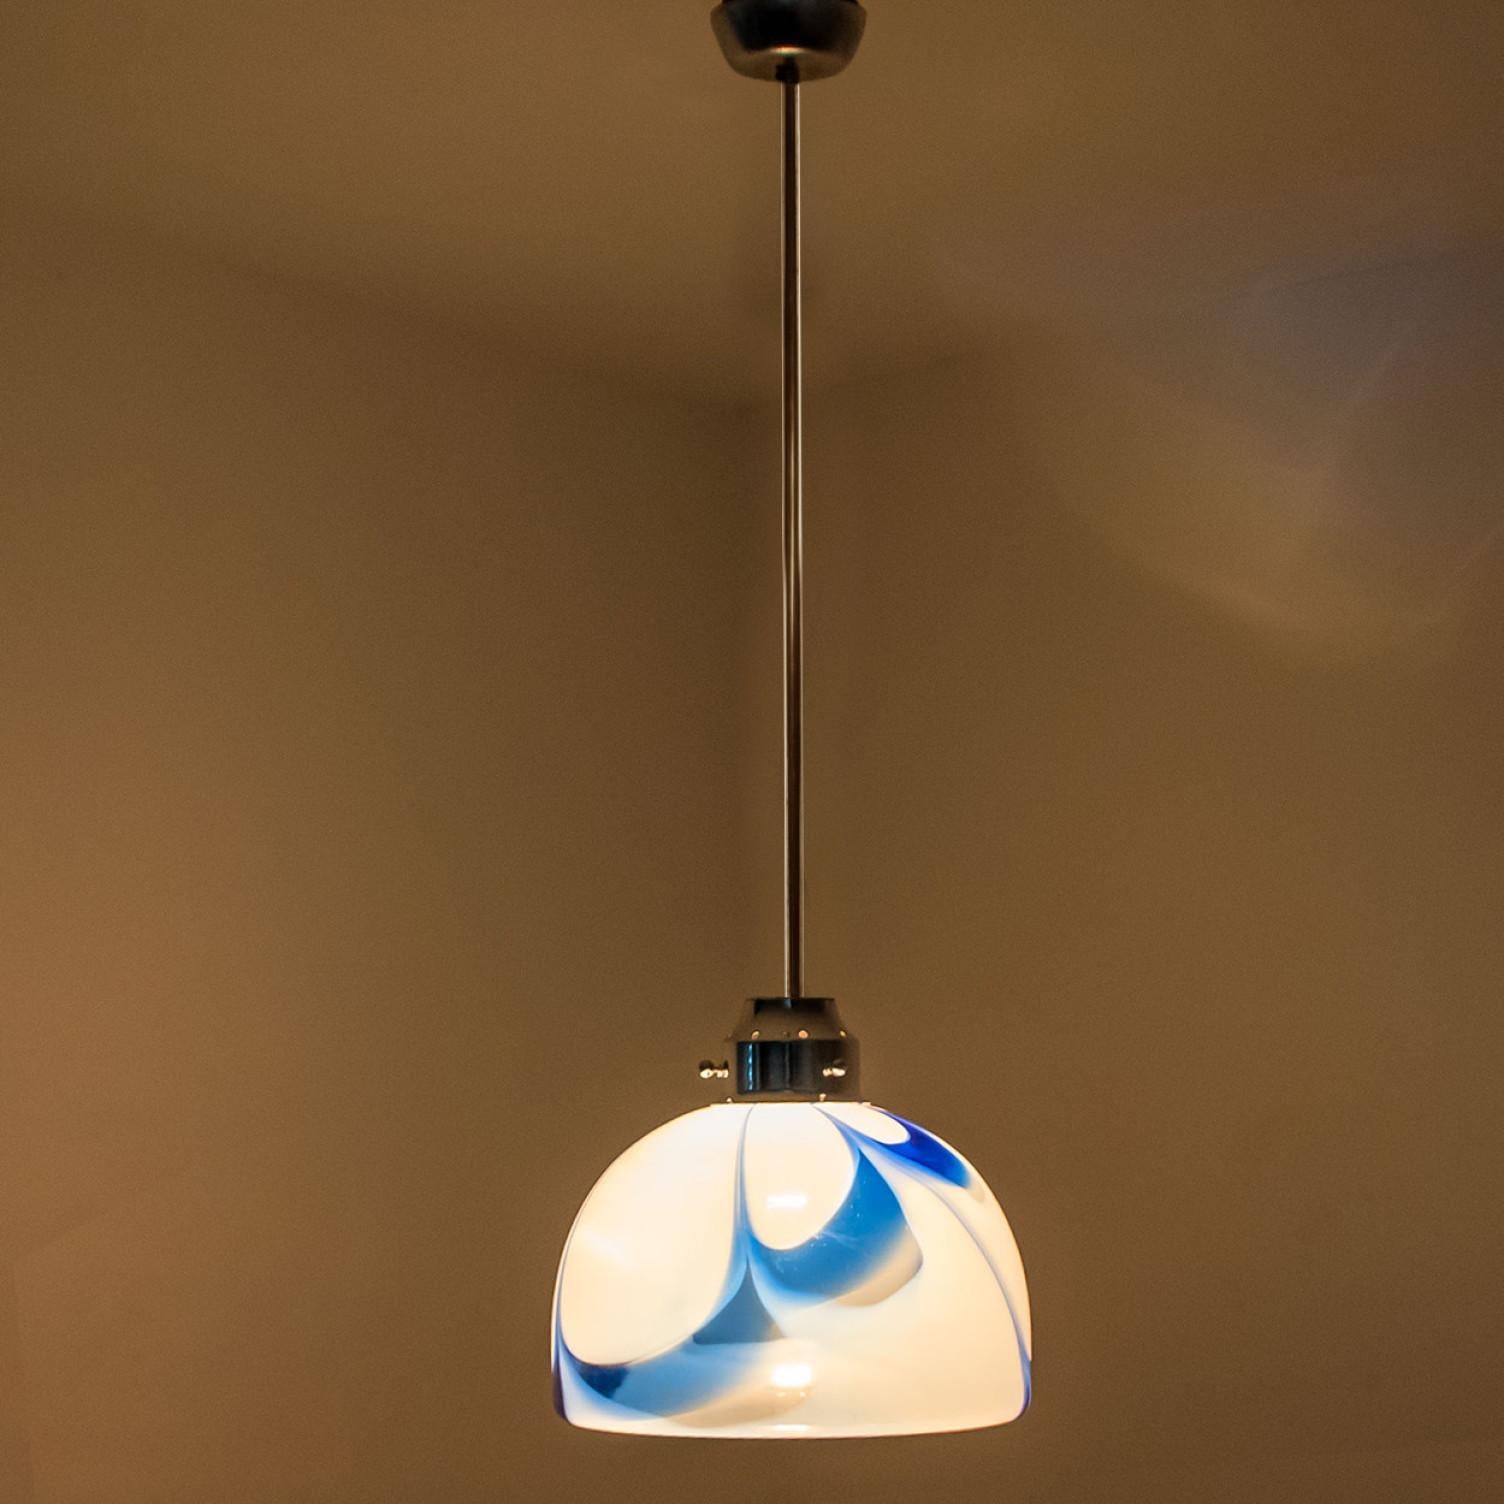 Murano White and Blue Glass Pendant Light, Italy, 1970s For Sale 1